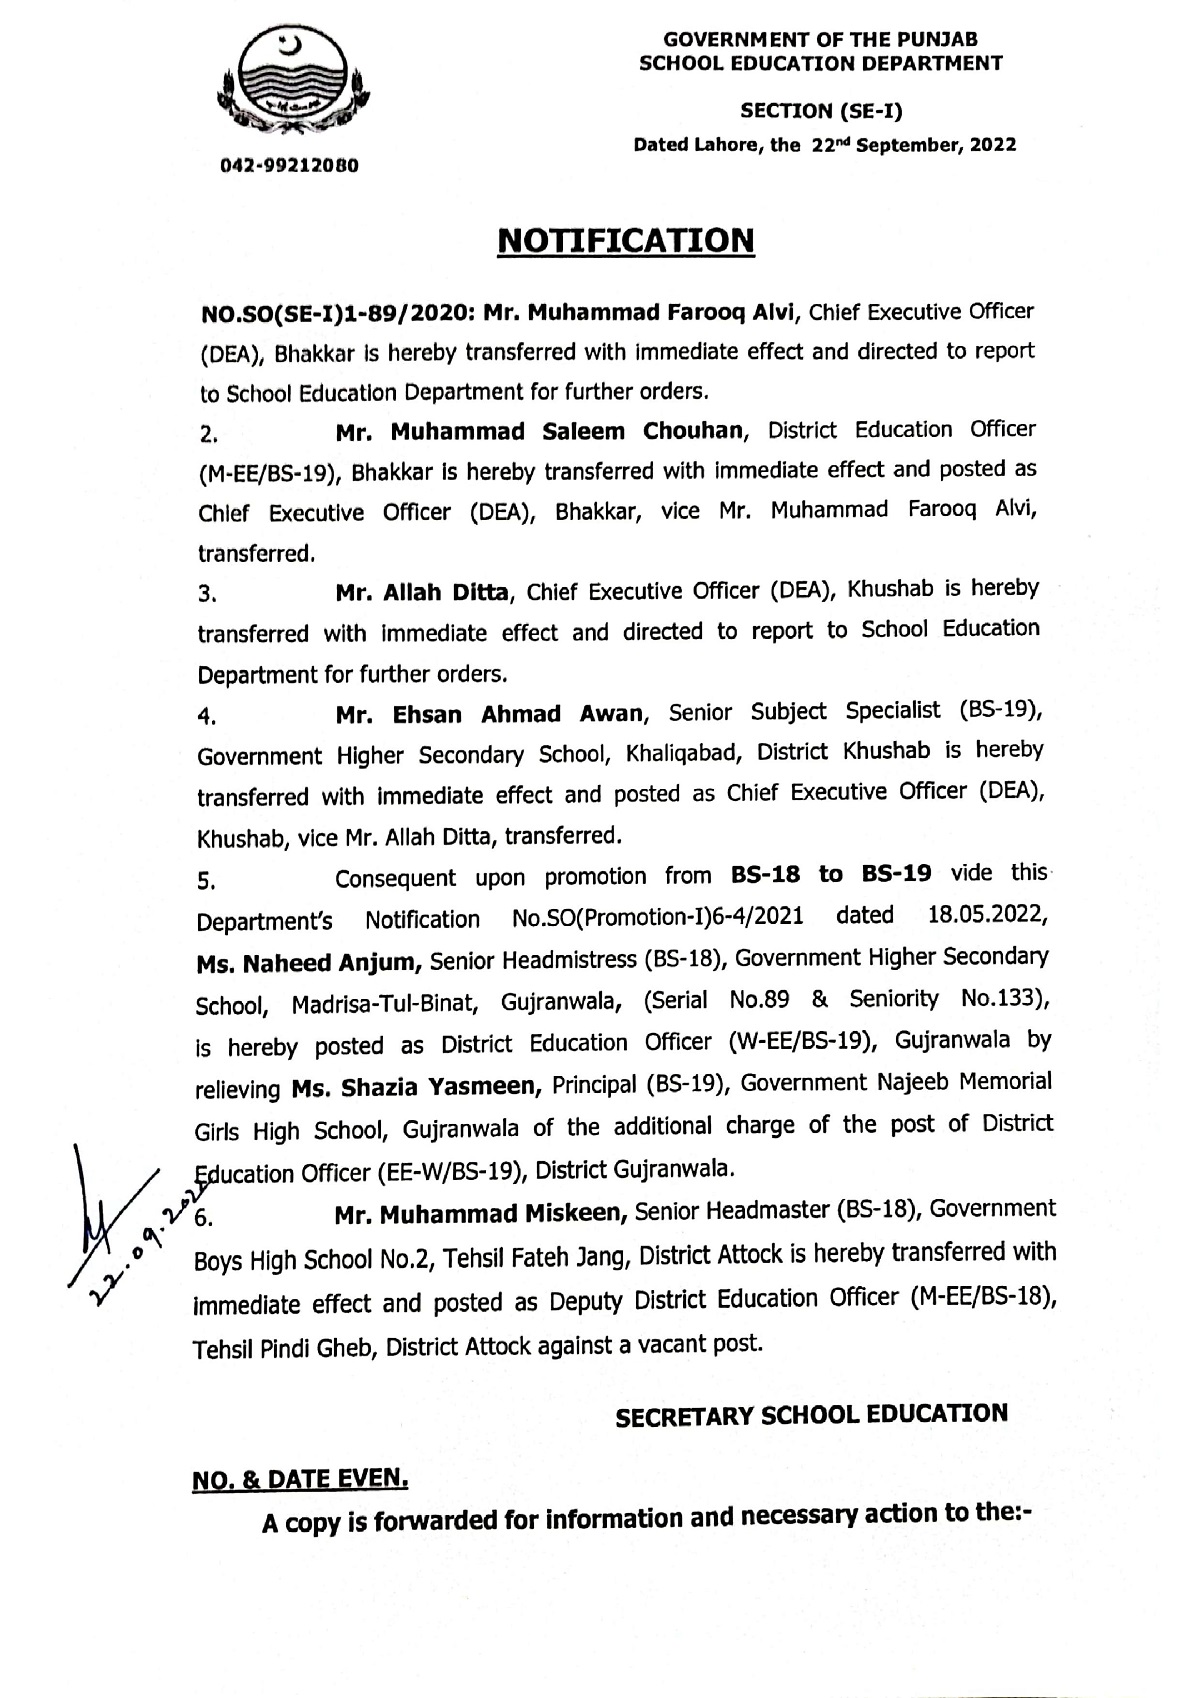 Transfer and Posting of Bureaucracy in School Education Department Punjab